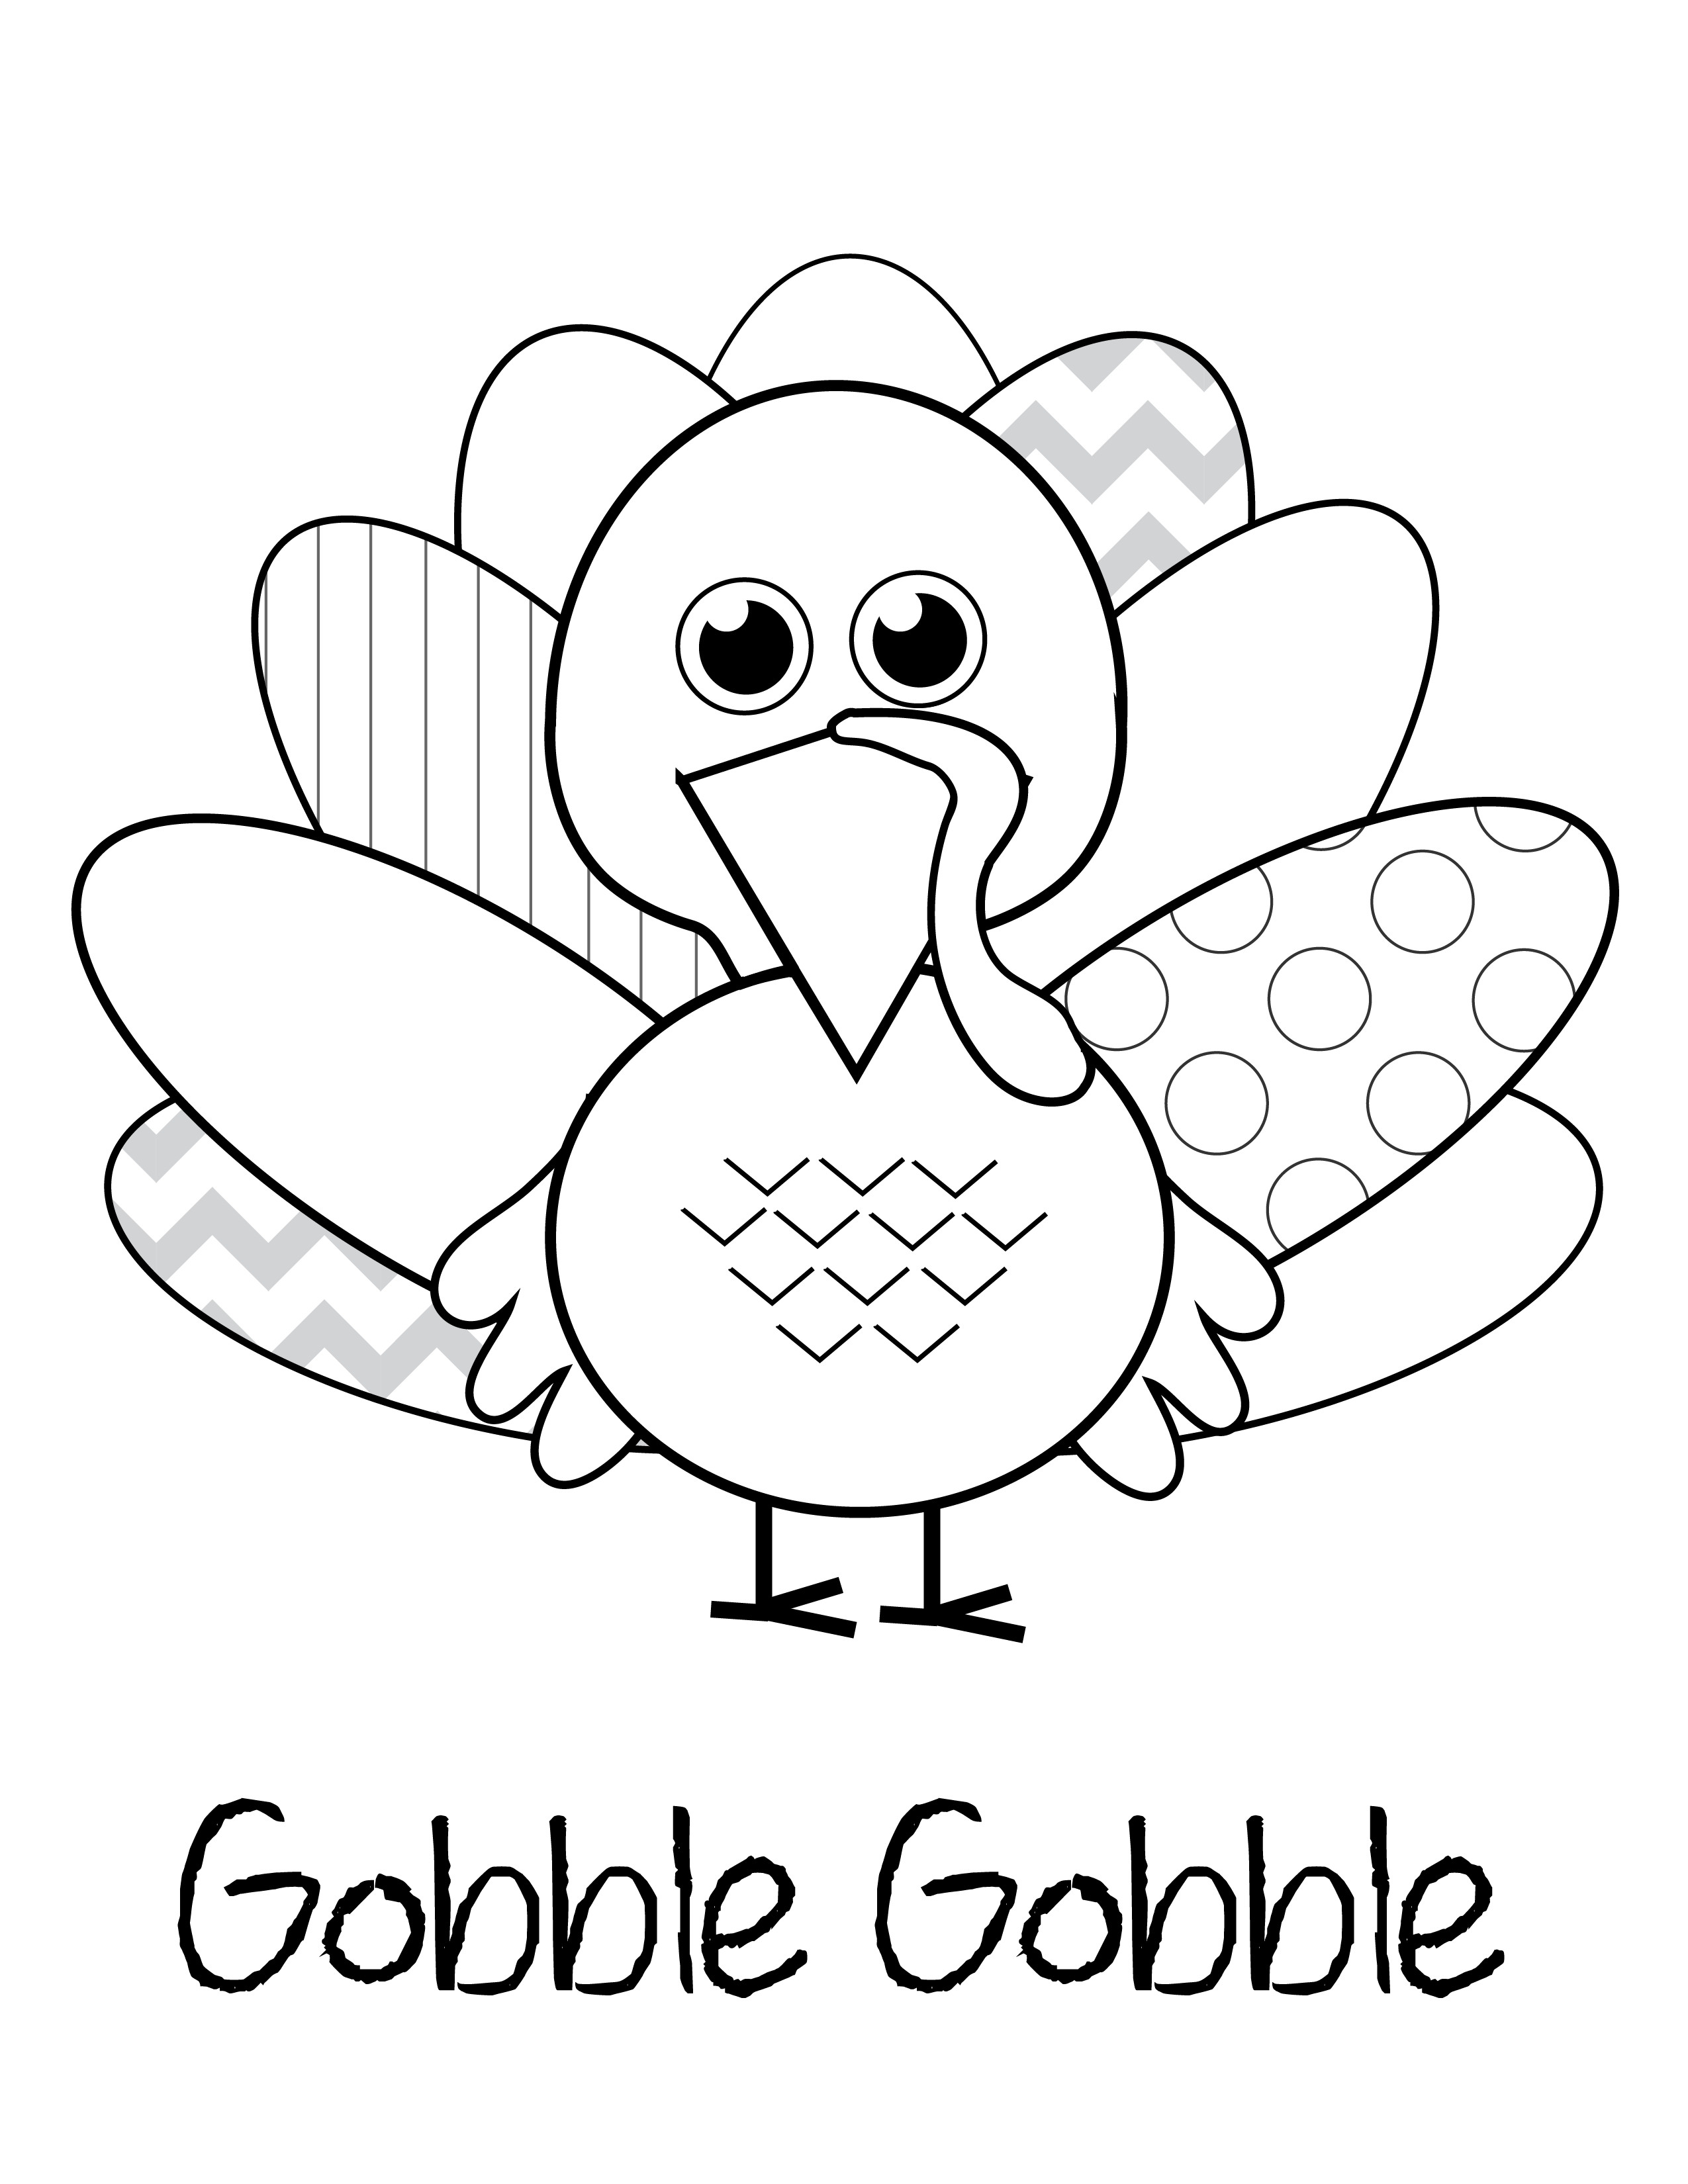 Free Thanksgiving Coloring Pages To Print
 free thanksgiving printables